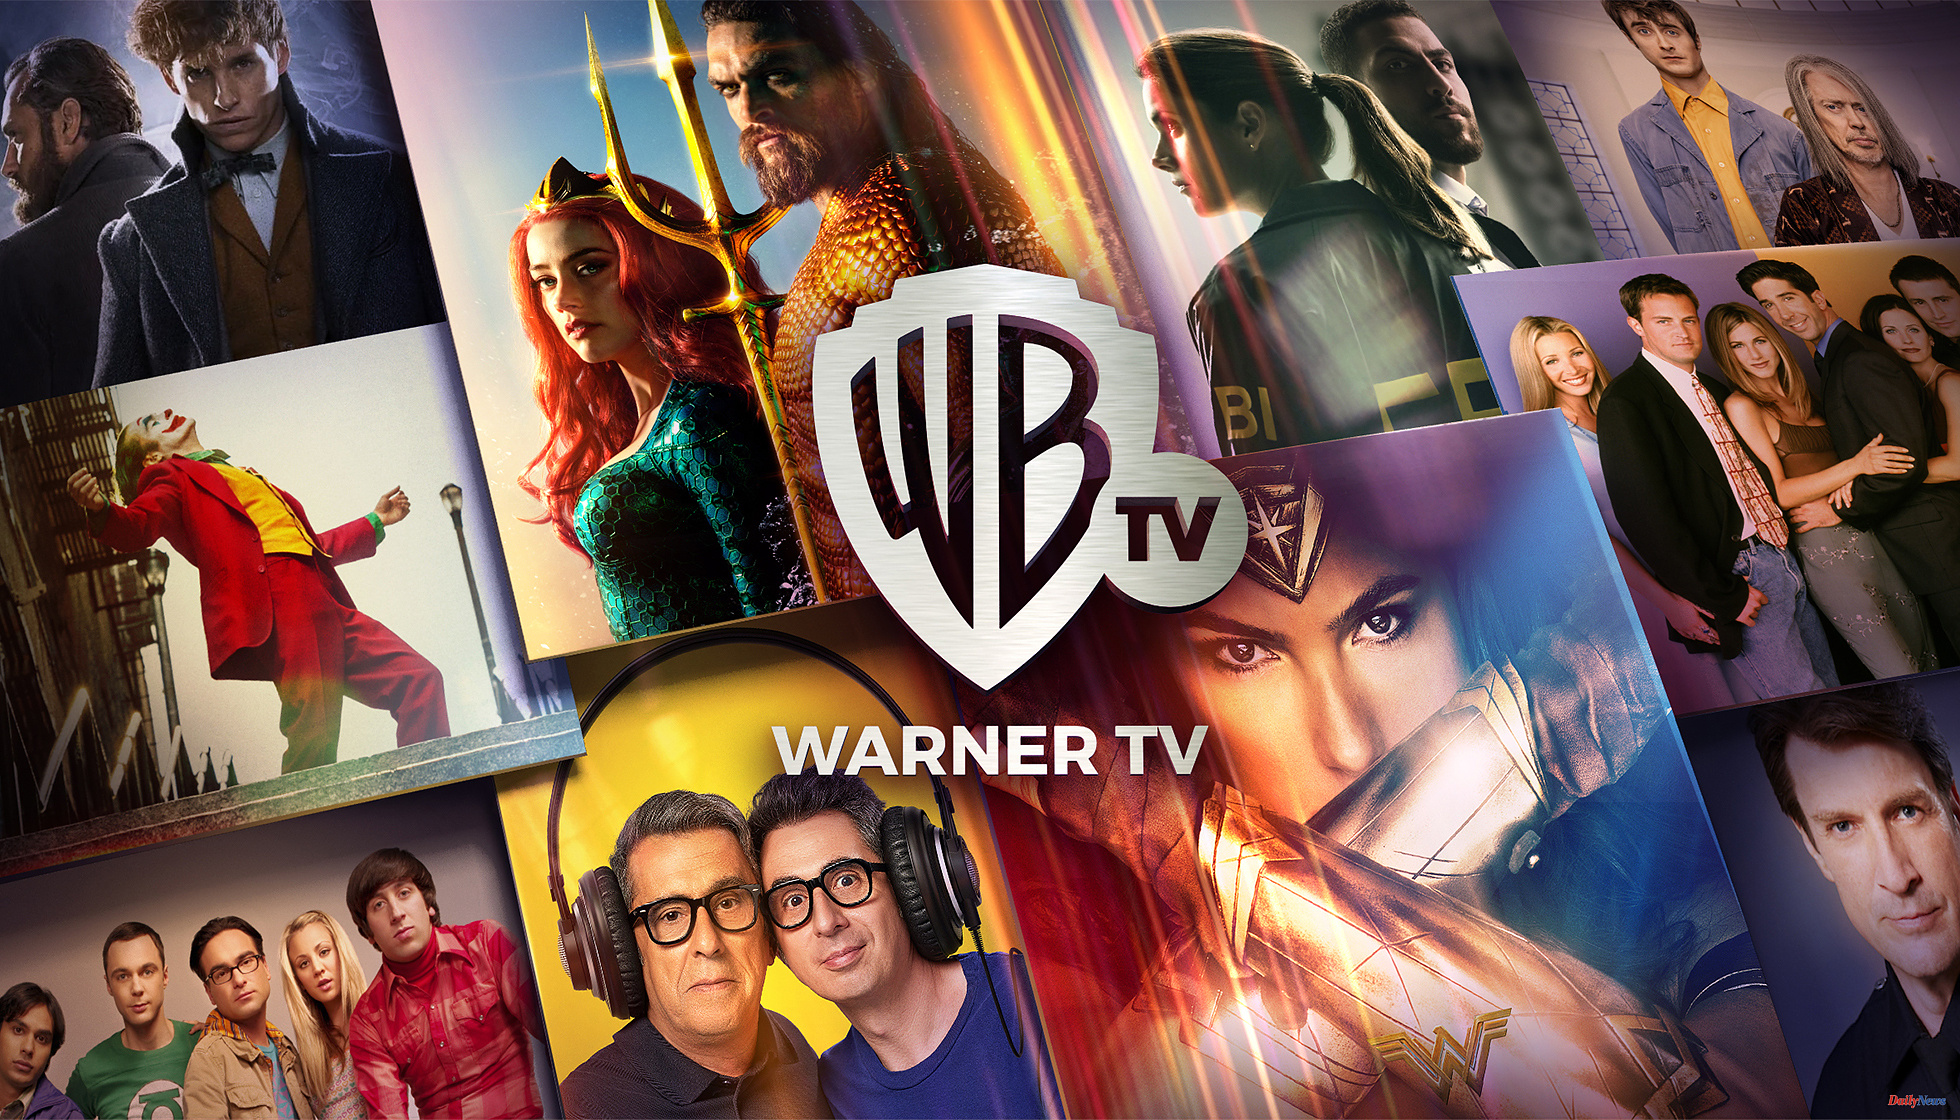 Programming Friends, The Big Bang theory and the entire DC Universe, among the programming of the new Warner TV channel